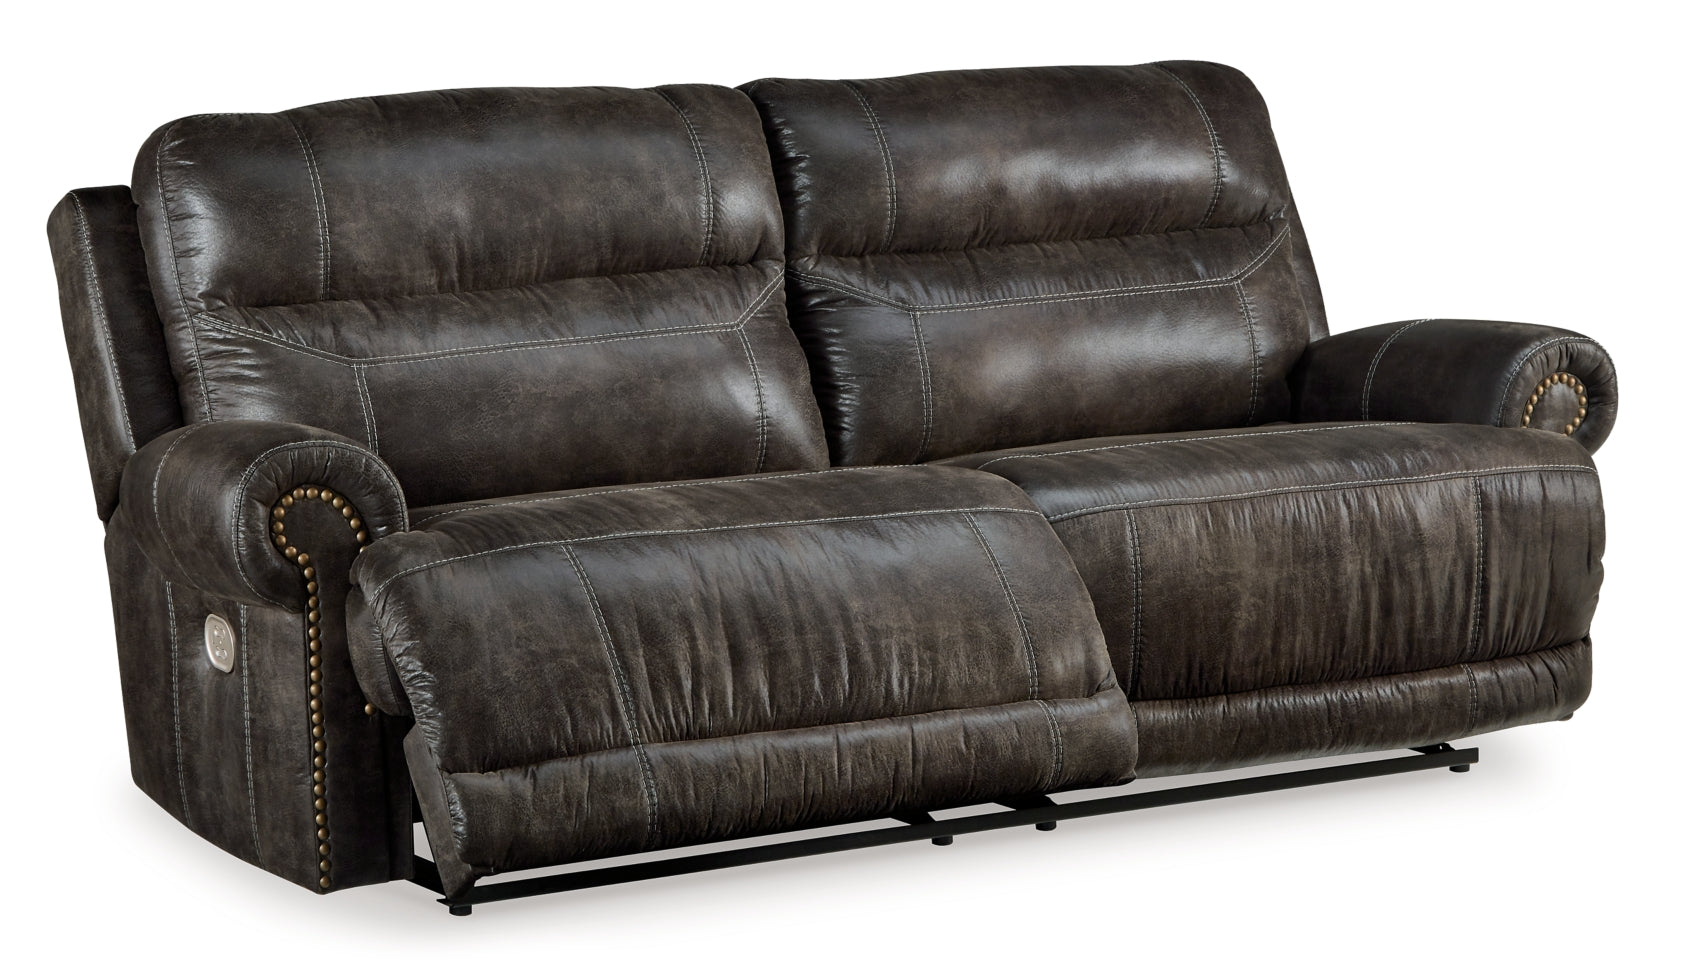 Grearview Sofa and Loveseat - furniture place usa